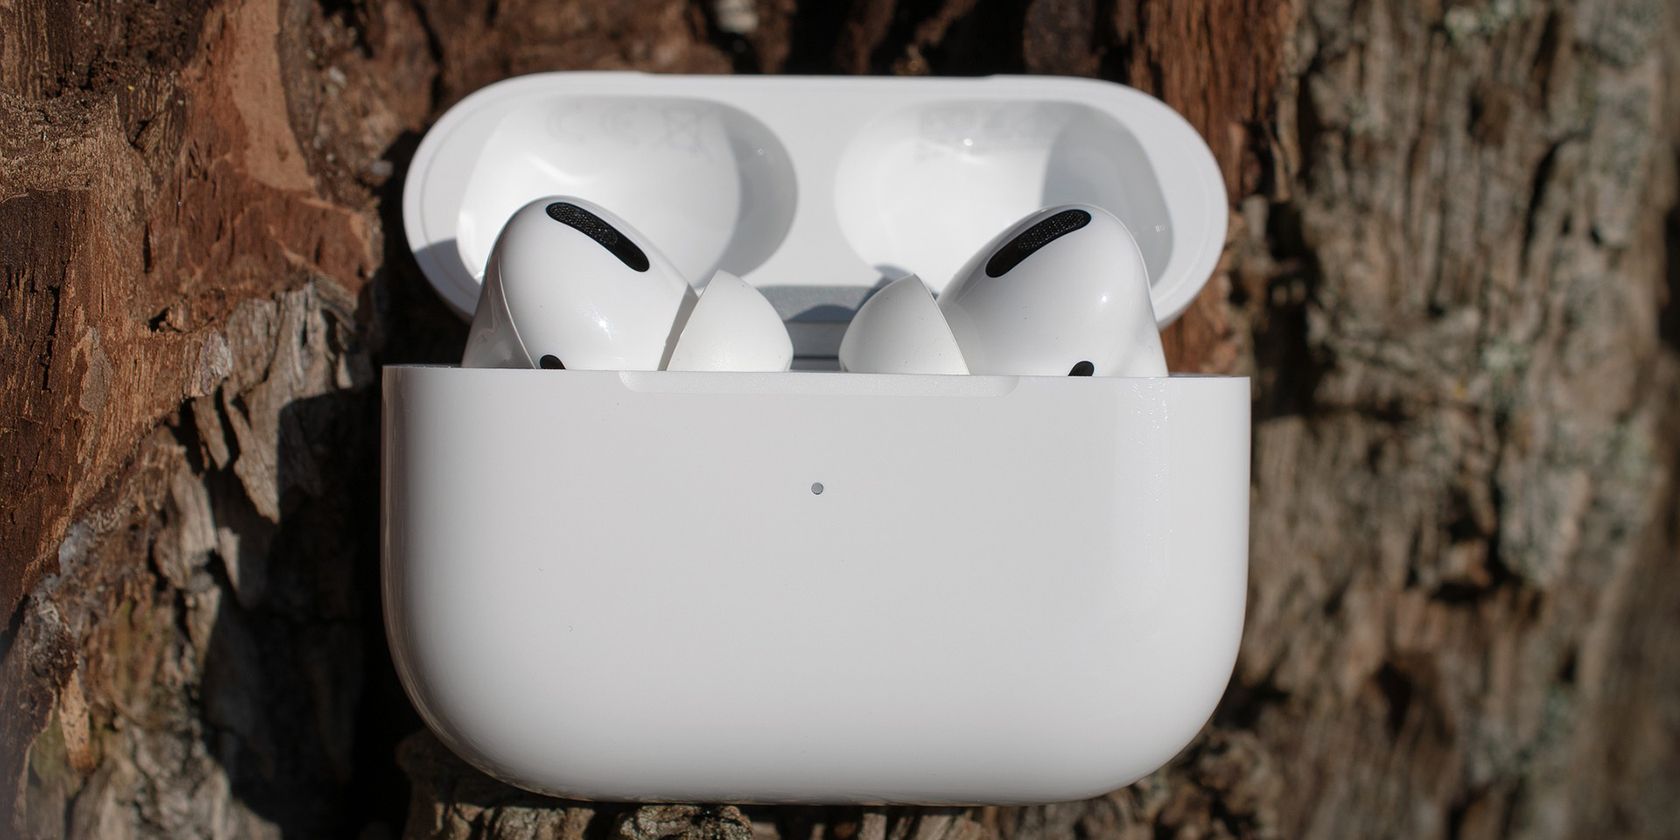 AirPods Pro in the charging case with the lid open